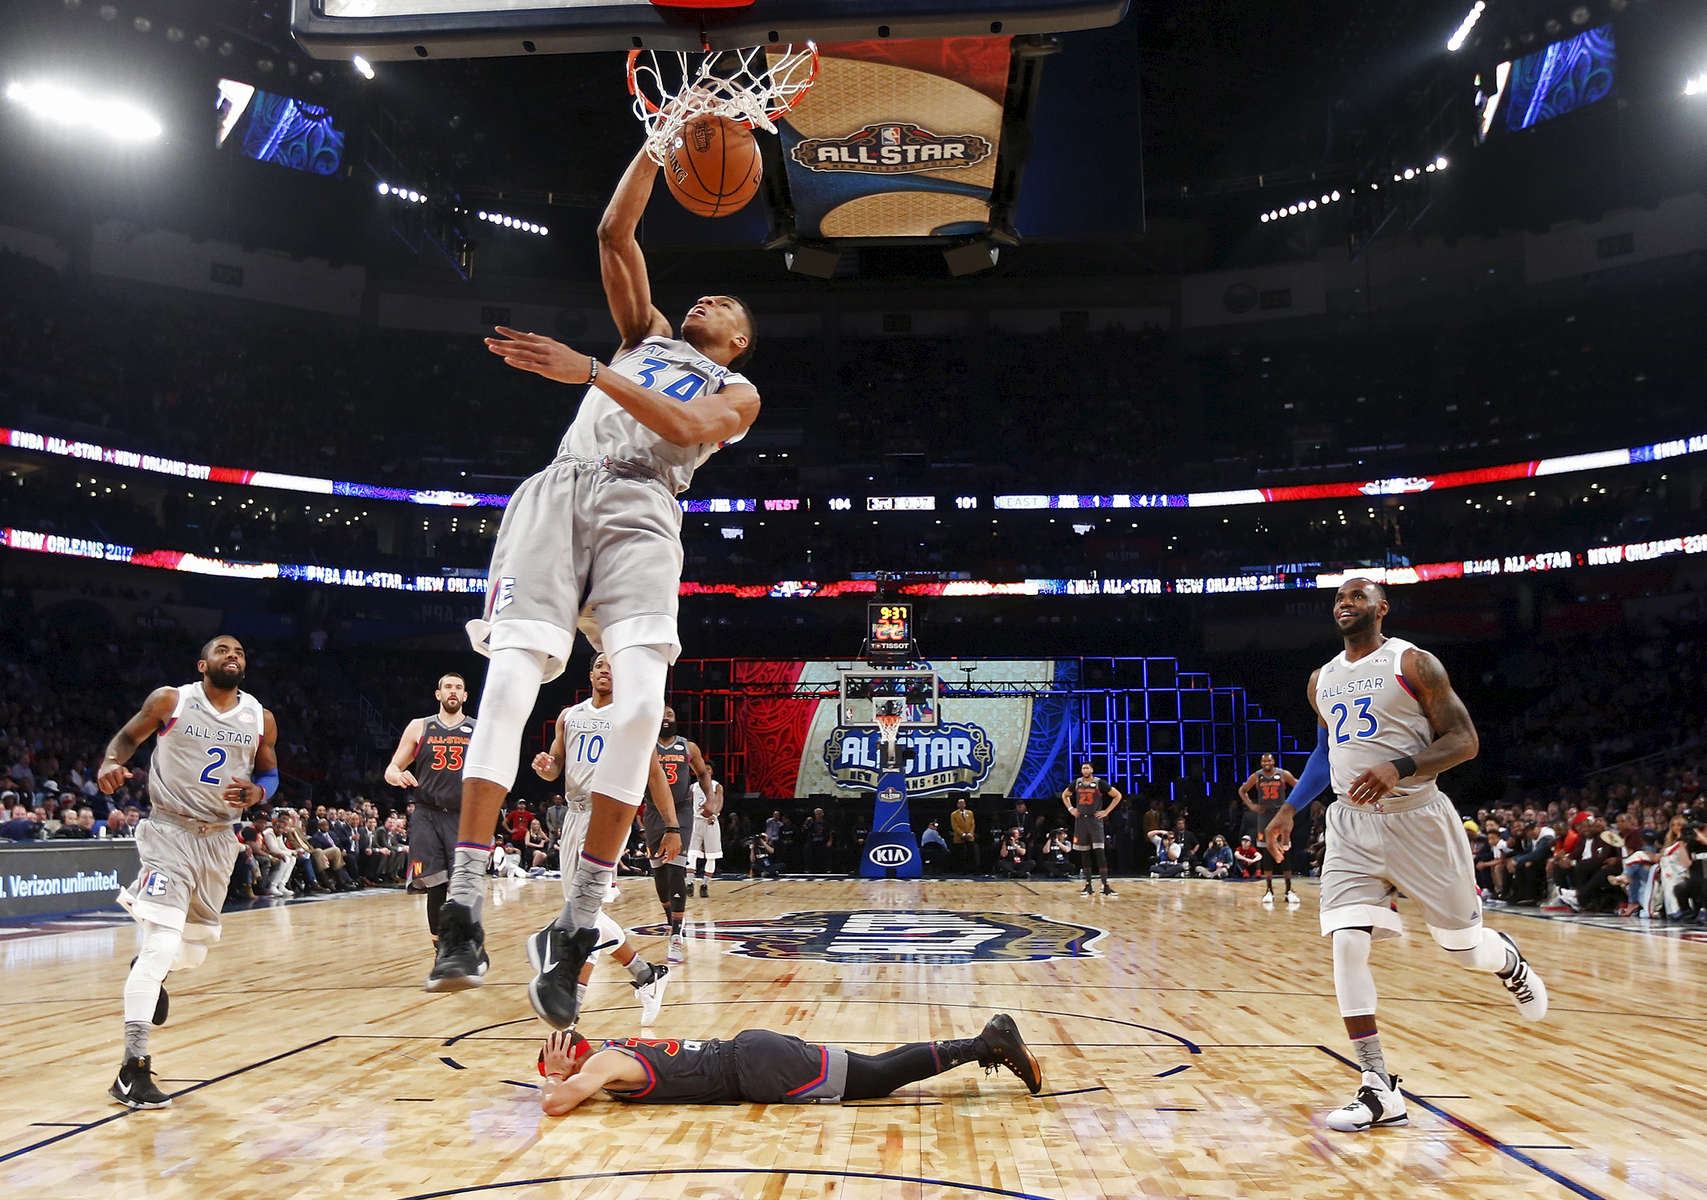 Eastern Conference small forward Giannis Antetokounmpo of the Milwaukee Bucks (34) slam dunks as Western Conference guard Stephen Curry of the Golden State Warriors (30) lies on the court during the first half of the NBA All-Star basketball game in New Orleans, Sunday, Feb. 19, 2017. (AP Photo/Max Becherer)